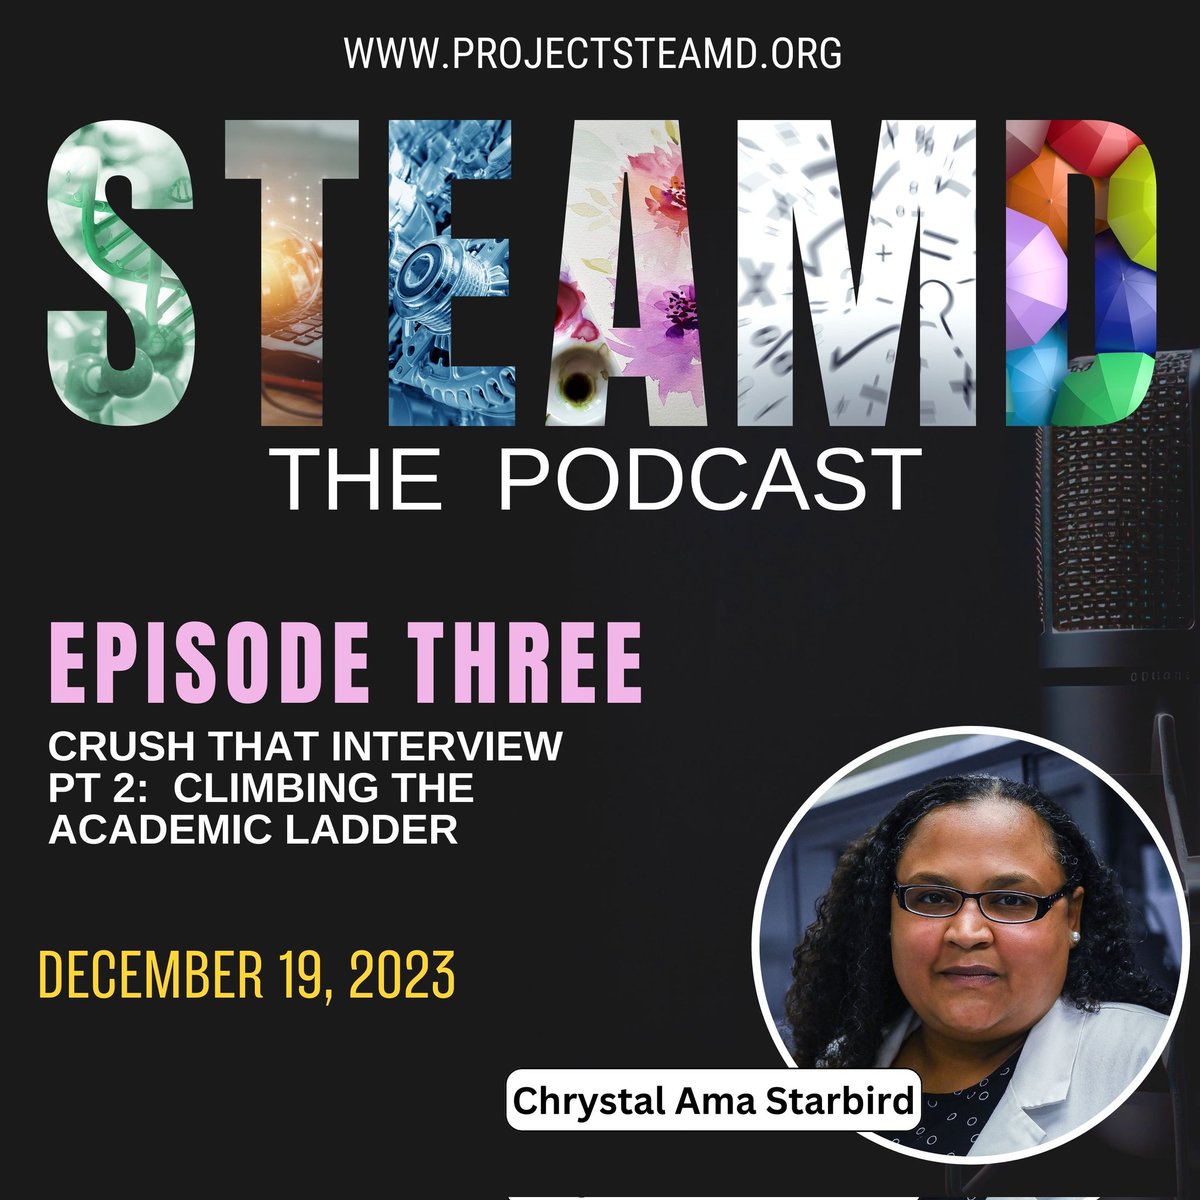 Episode 3 will be out #Tomorrow
#listen to @drstarbird
talk about her exciting career as a structural biologist and her journey into #academia

#steamdthepodcast #projecsteamd #womeninSTEAM #womeninscience #structuralbiology #interviewing #careeradvice #careerdevelopment